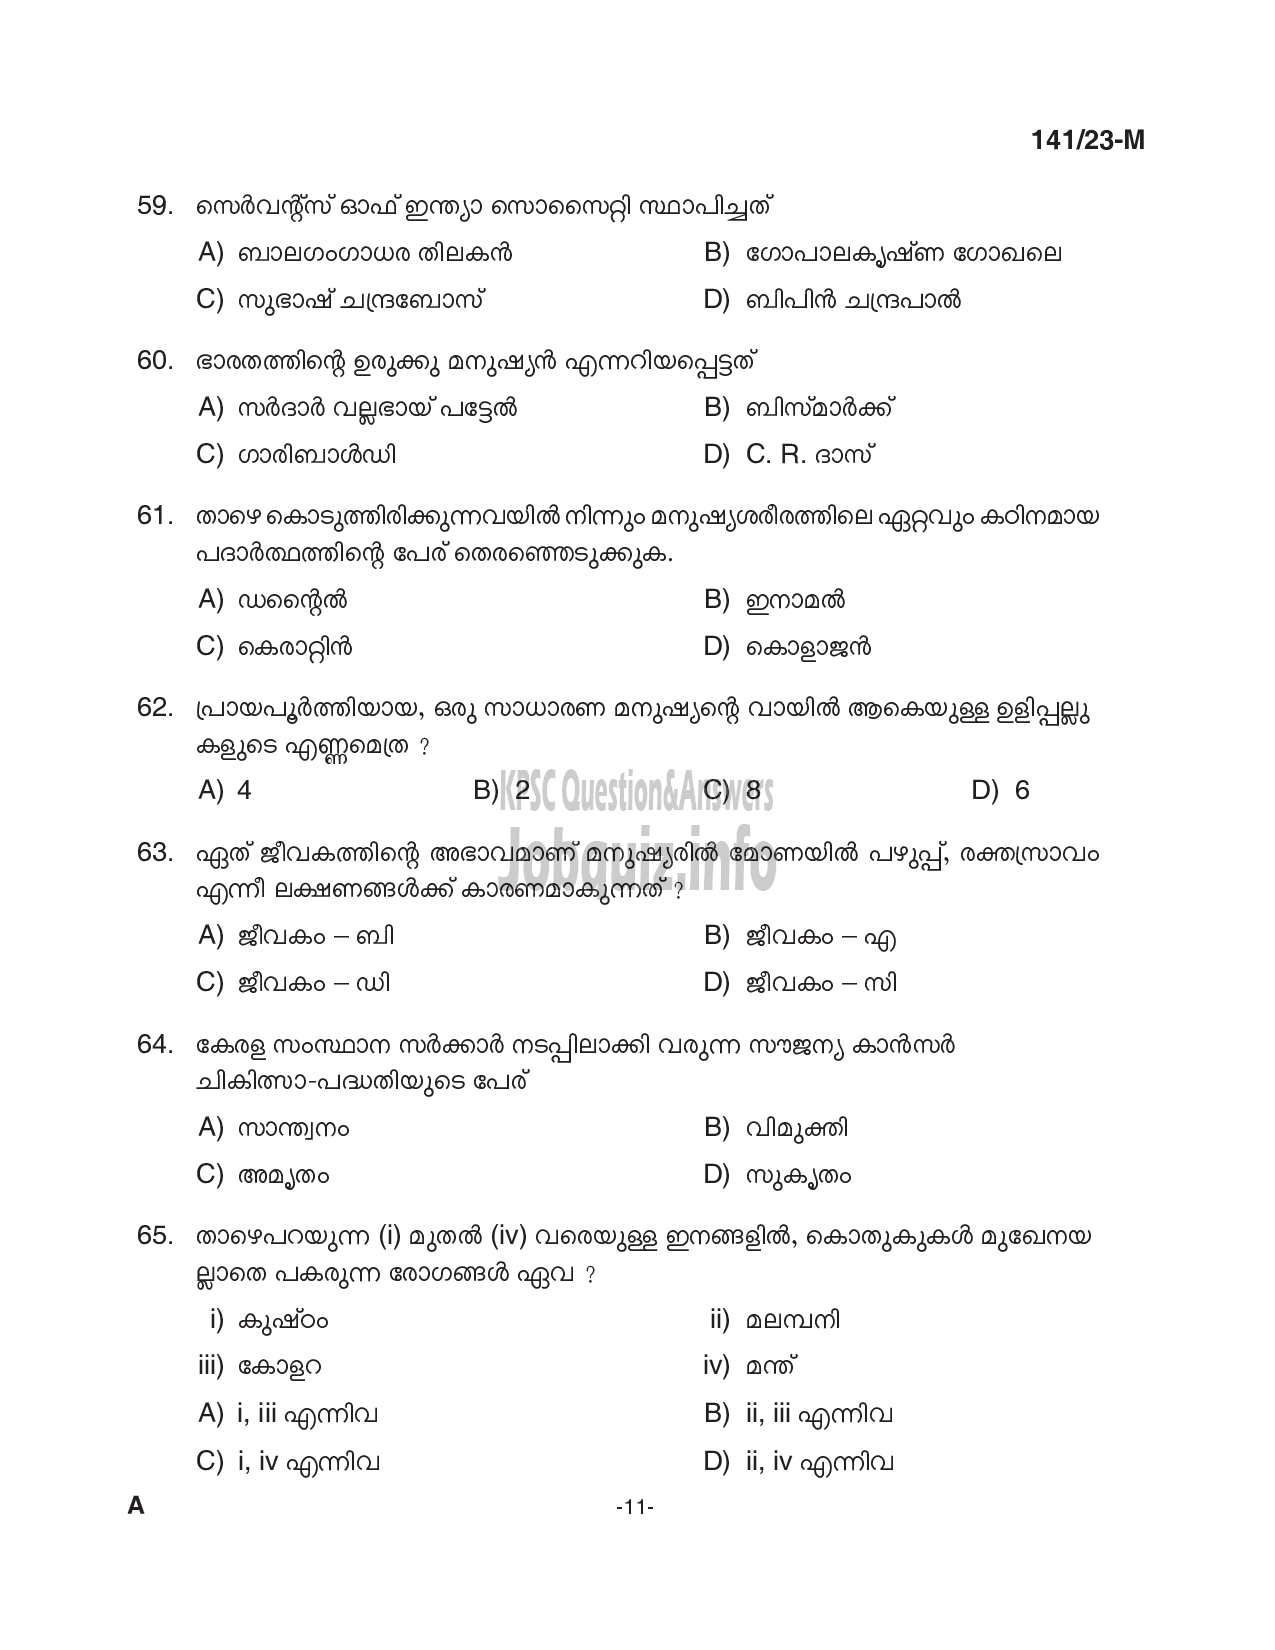 Kerala PSC Question Paper - preliminary Examination – Stage 1 (University L G S,Cooly worker,Office Attendant etc.) -11